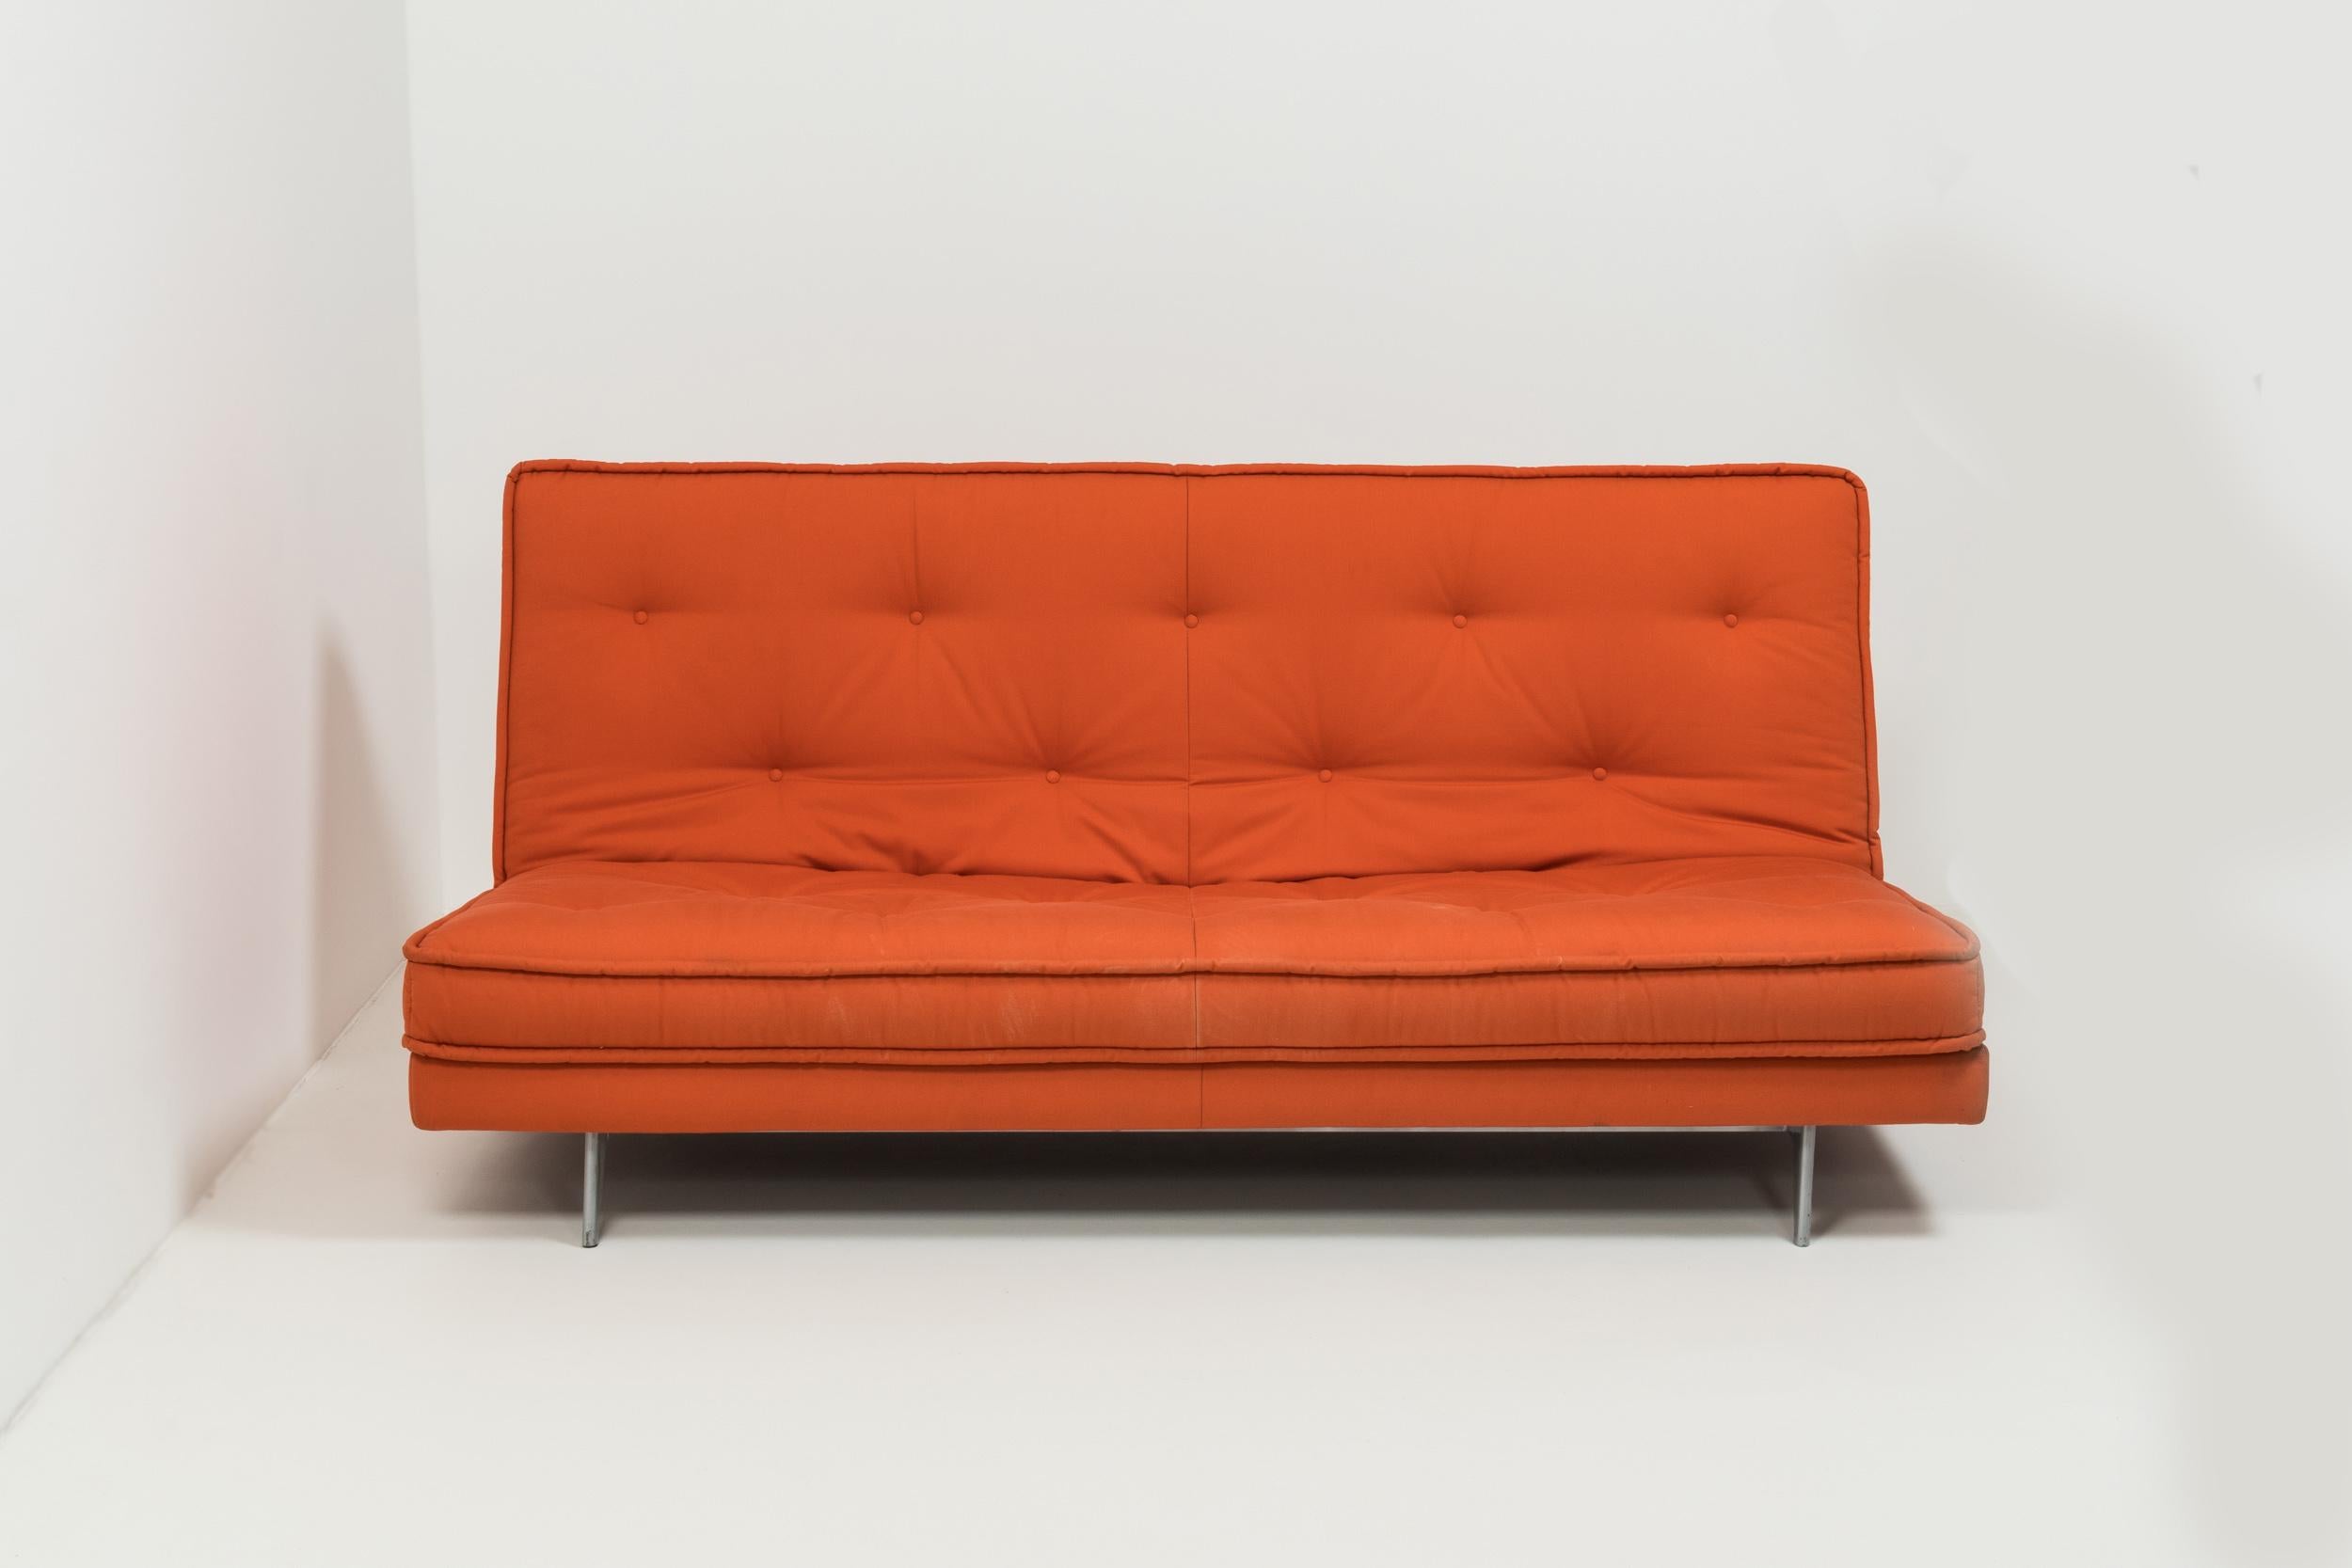 French Modern Nomade Express Red Three-Seat Sofa Bed by Didier Gomez for Linge Roset